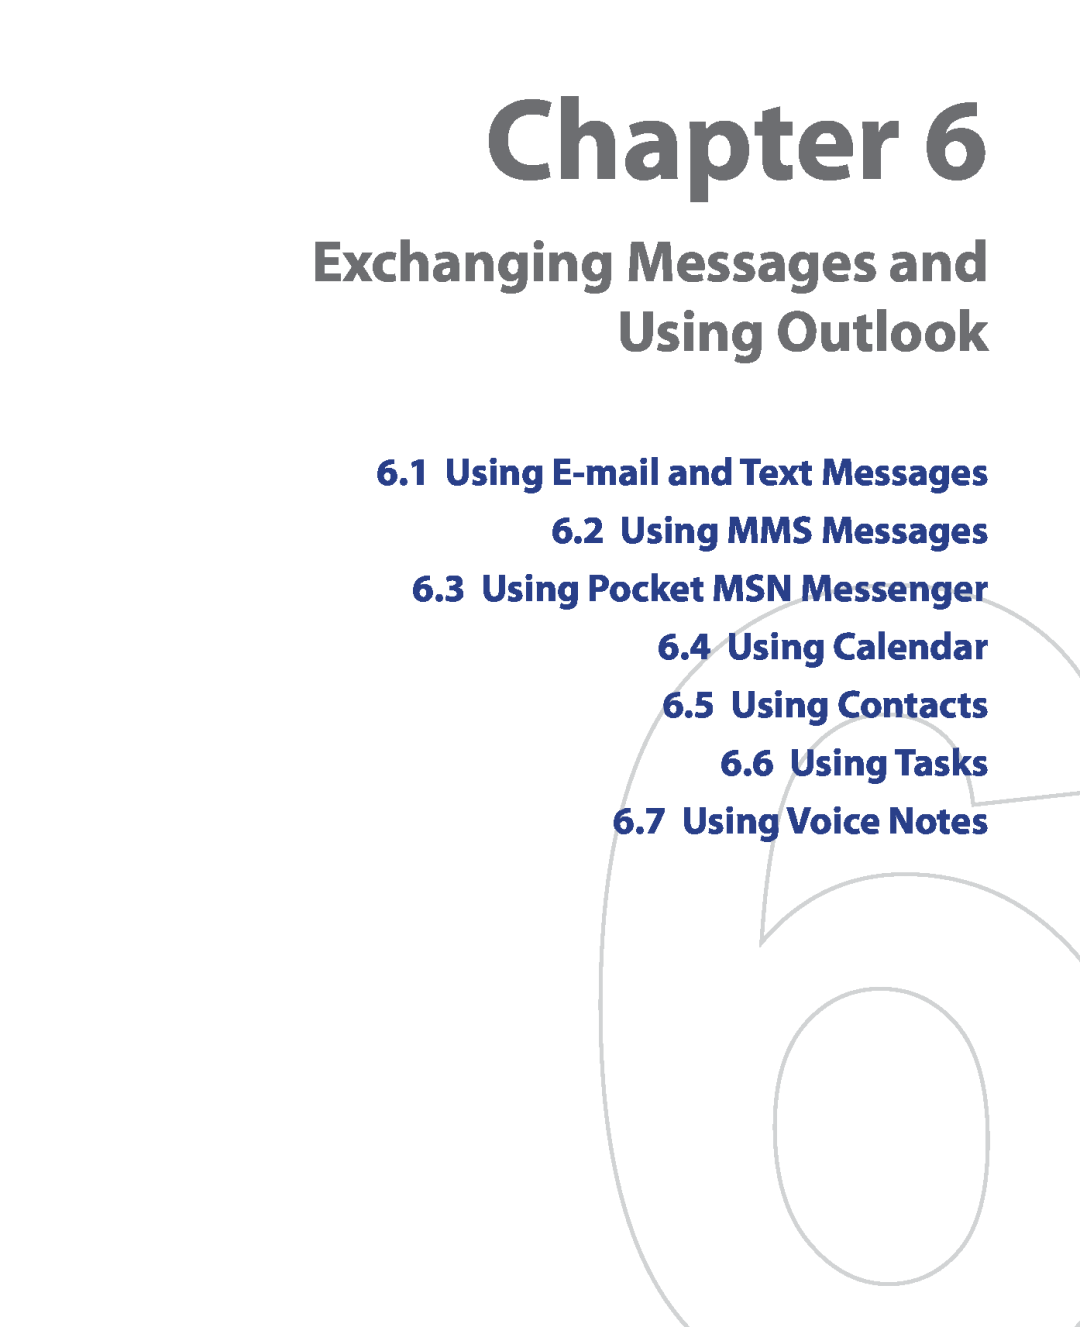 HTC HTC S621 Exchanging Messages and Using Outlook, Using E-mail and Text Messages 6.2 Using MMS Messages, Chapter 